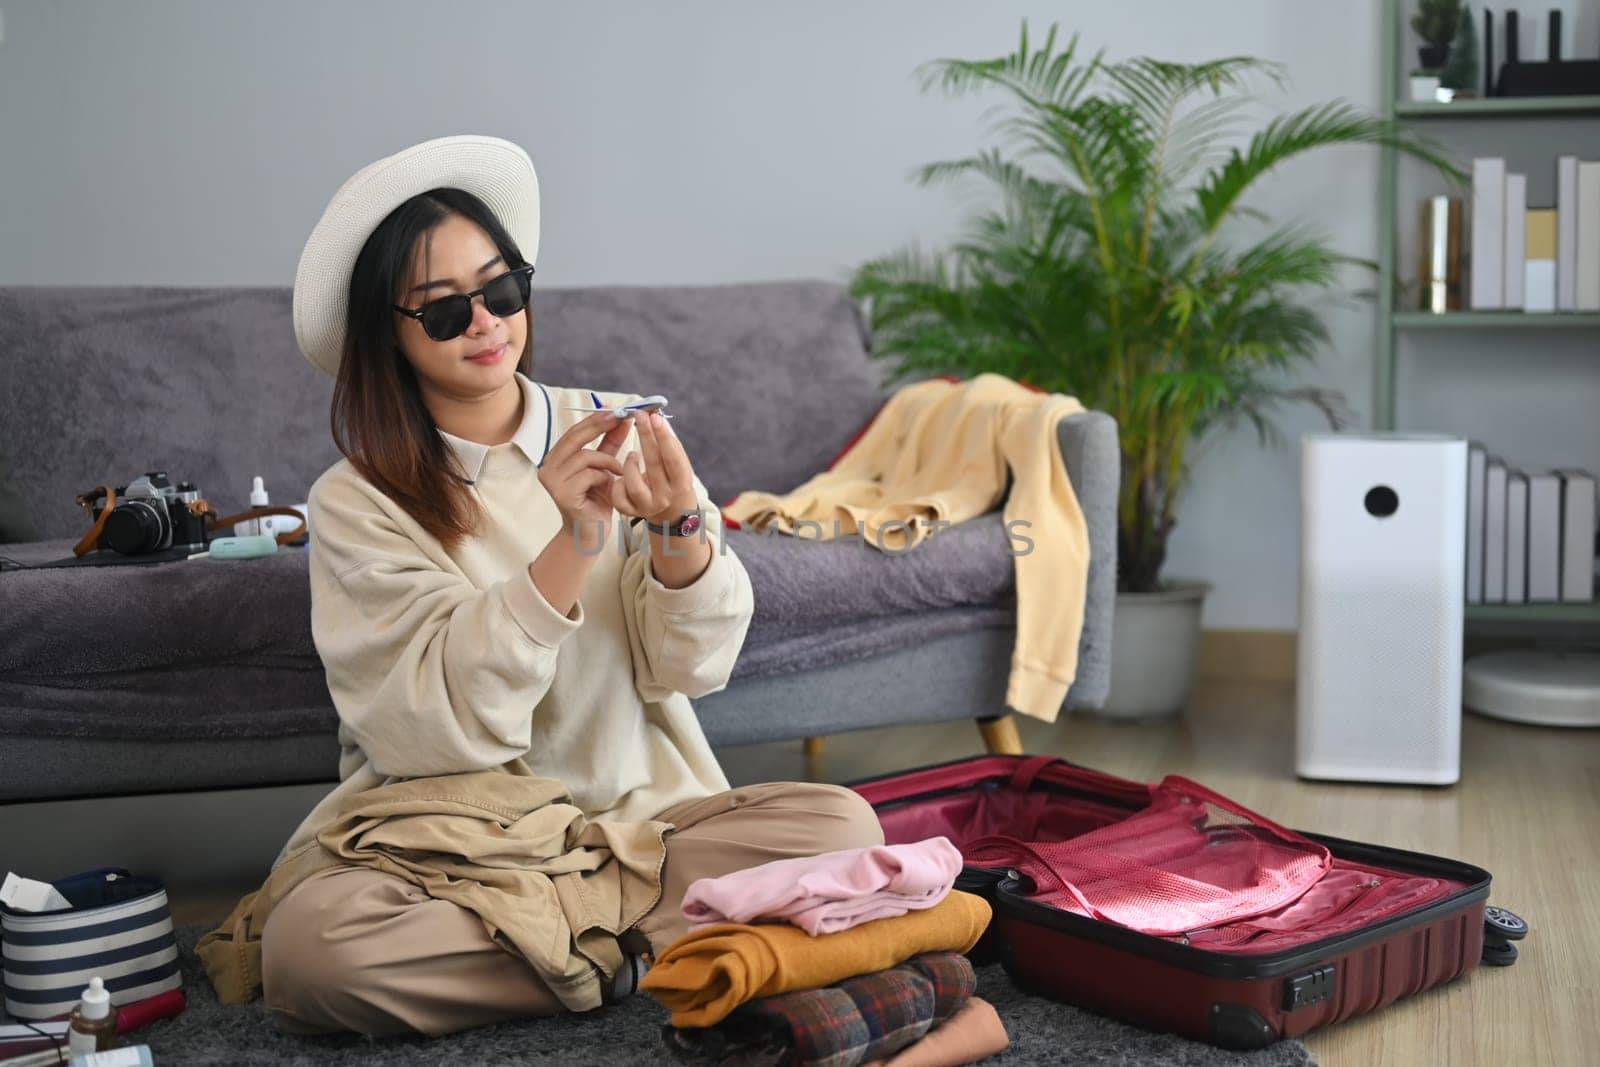 Happy woman traveler in sunglasses sitting on floor with suitcase hold airplane model in hands. Travel and vacation concept by prathanchorruangsak